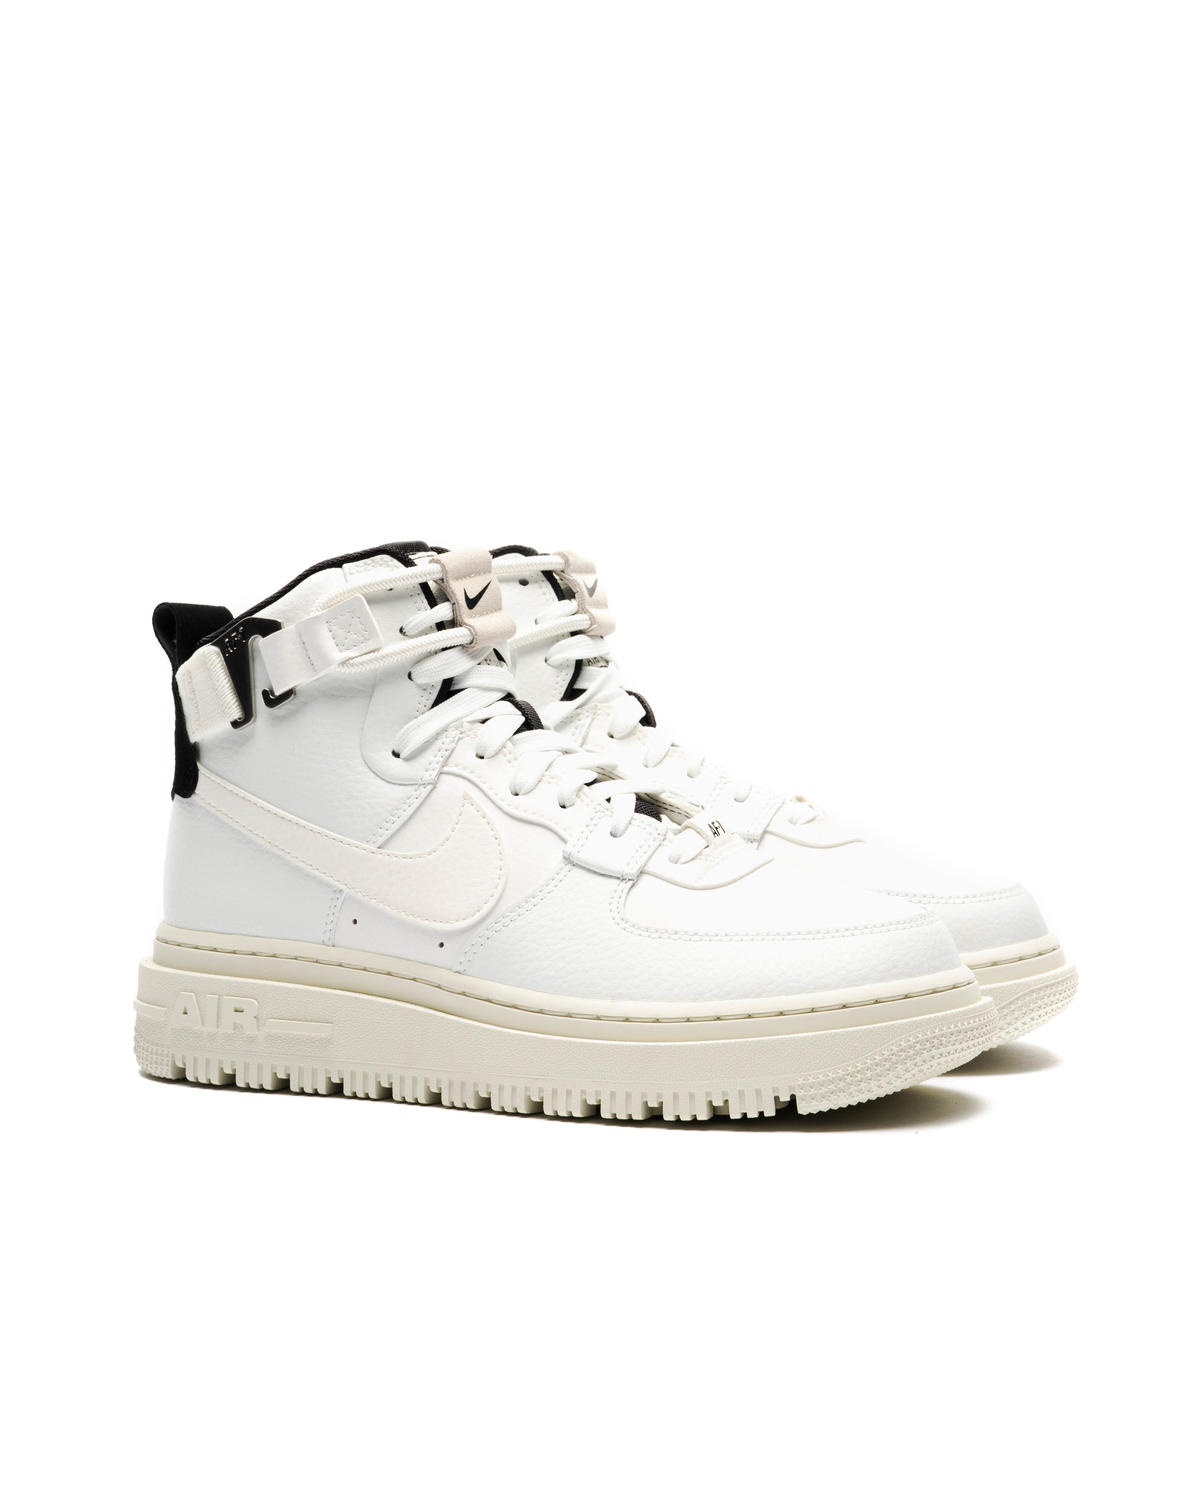 Nike WMNS Air Force 1 HIGH UTILITY 2.0 | DC3584-100 | AFEW STORE